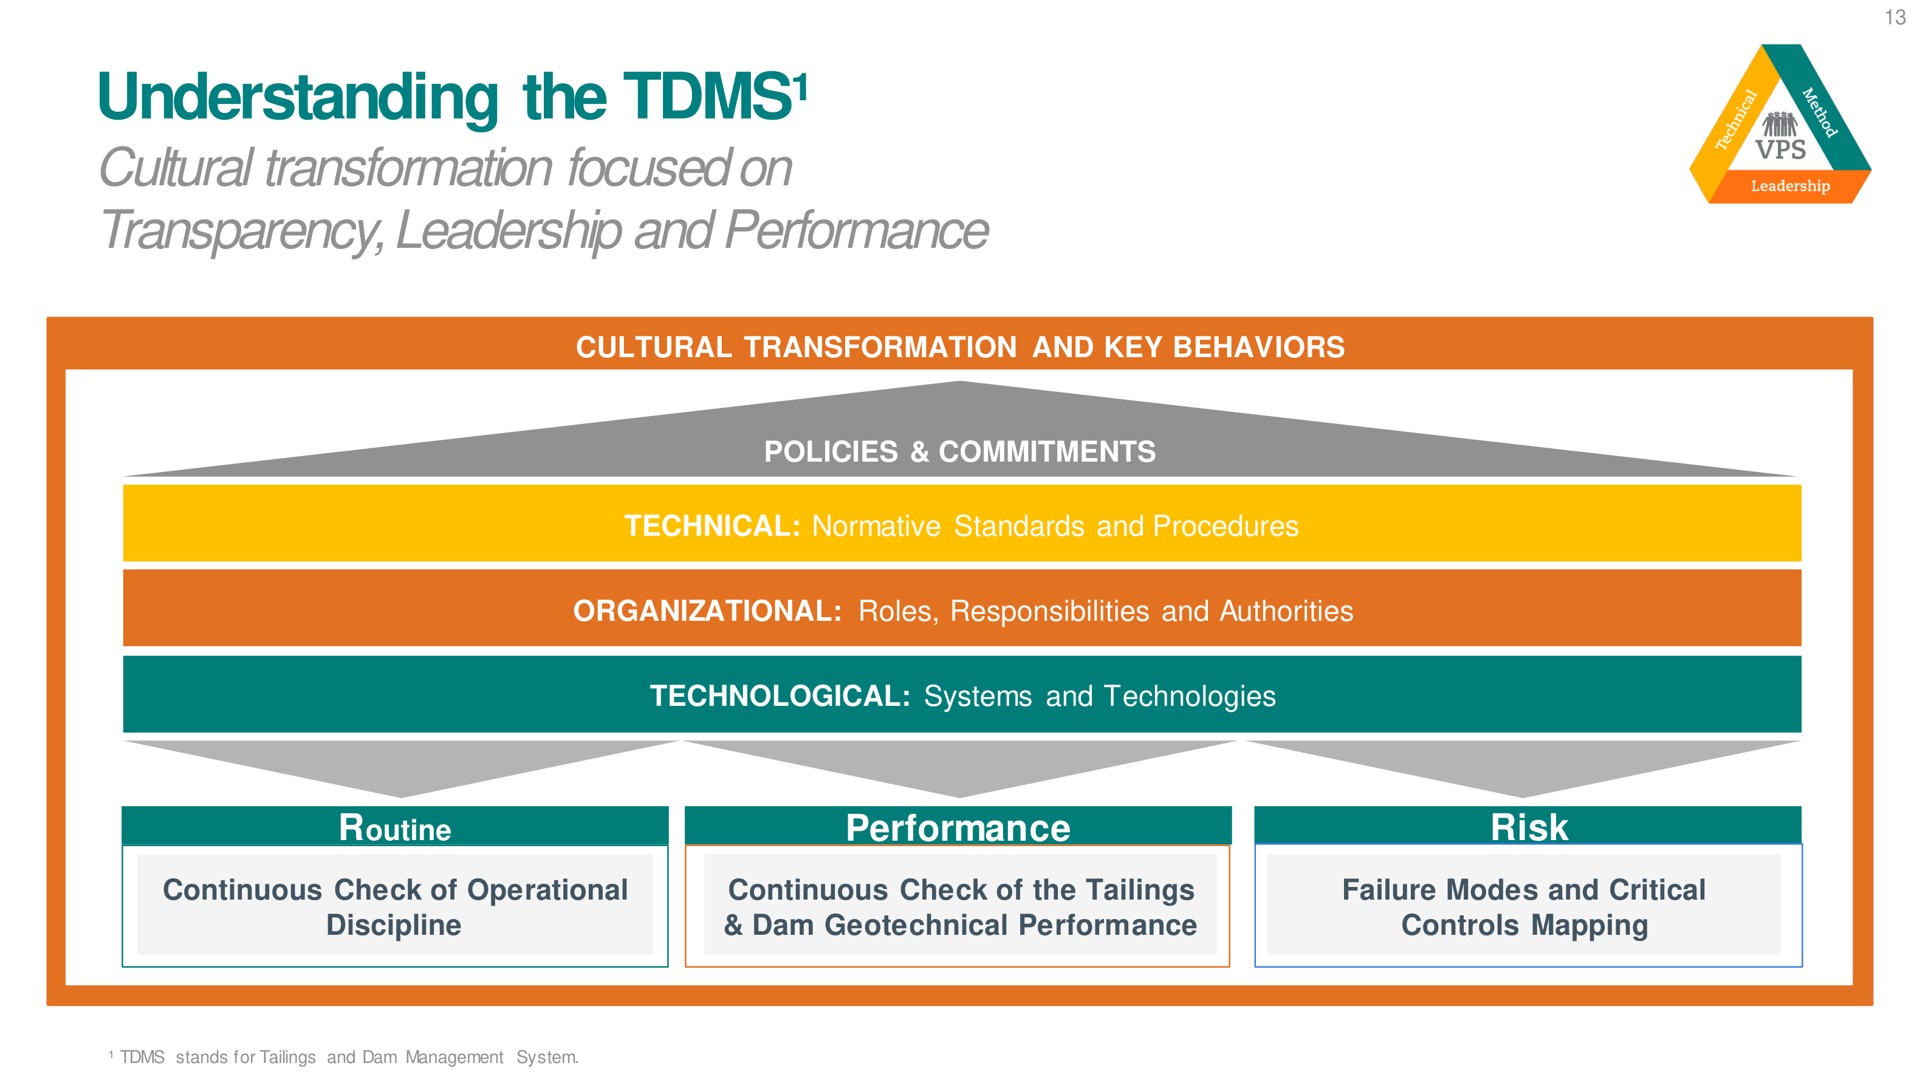 understanding the cultural transformation focused on transparency and performance | Vale